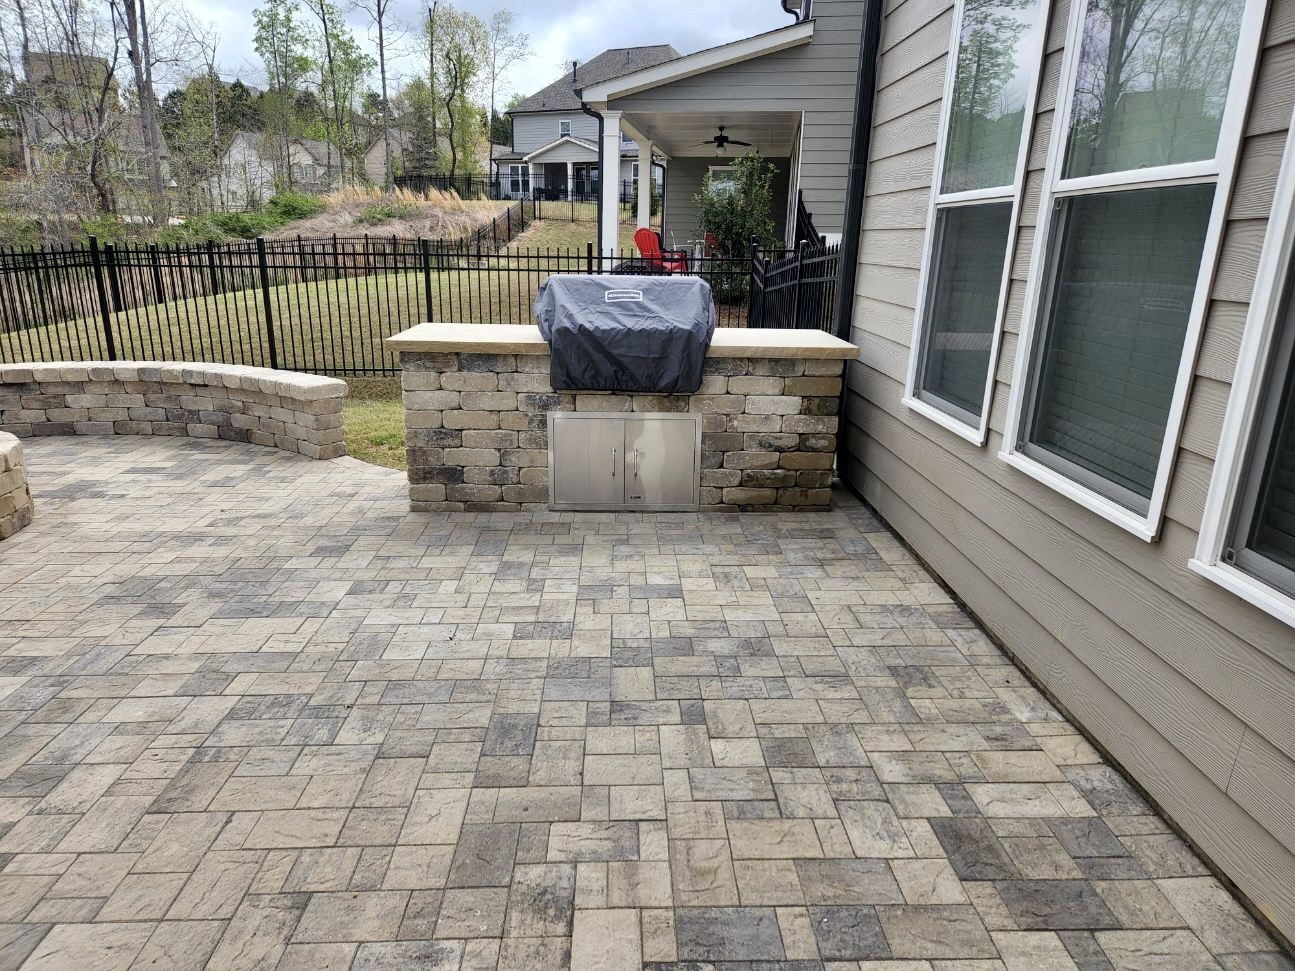 Belgard Patio and Outdoor Grill by Sugar Hill Outdoors